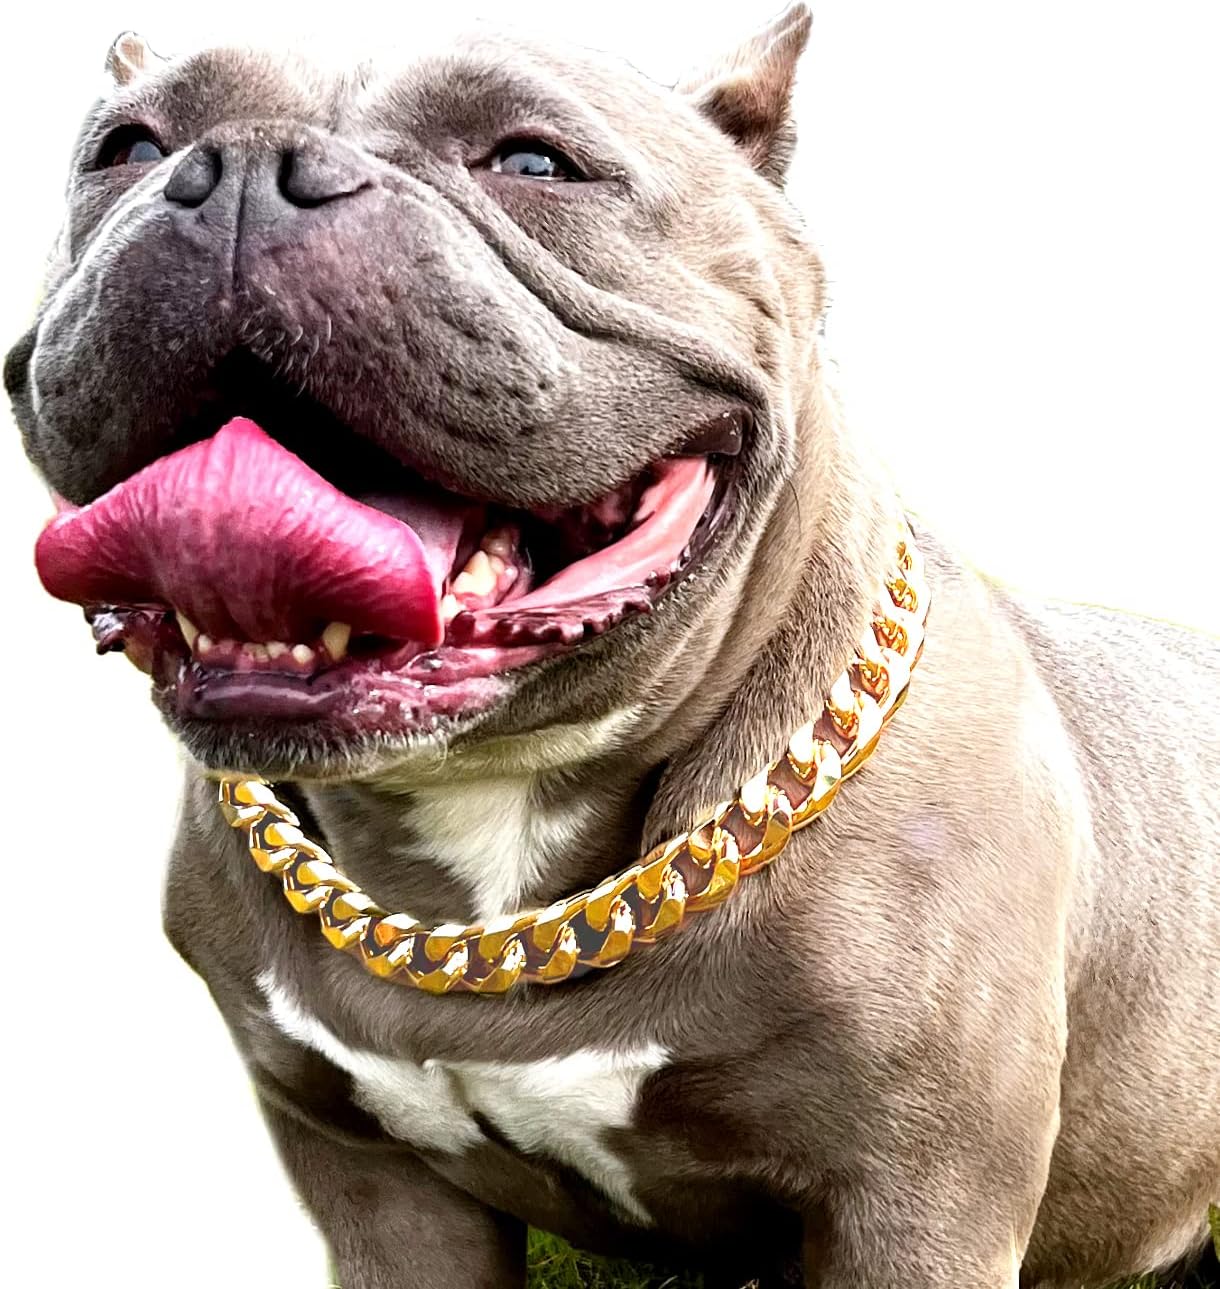 Bulldog tongue out wearing a thick gold dog chain